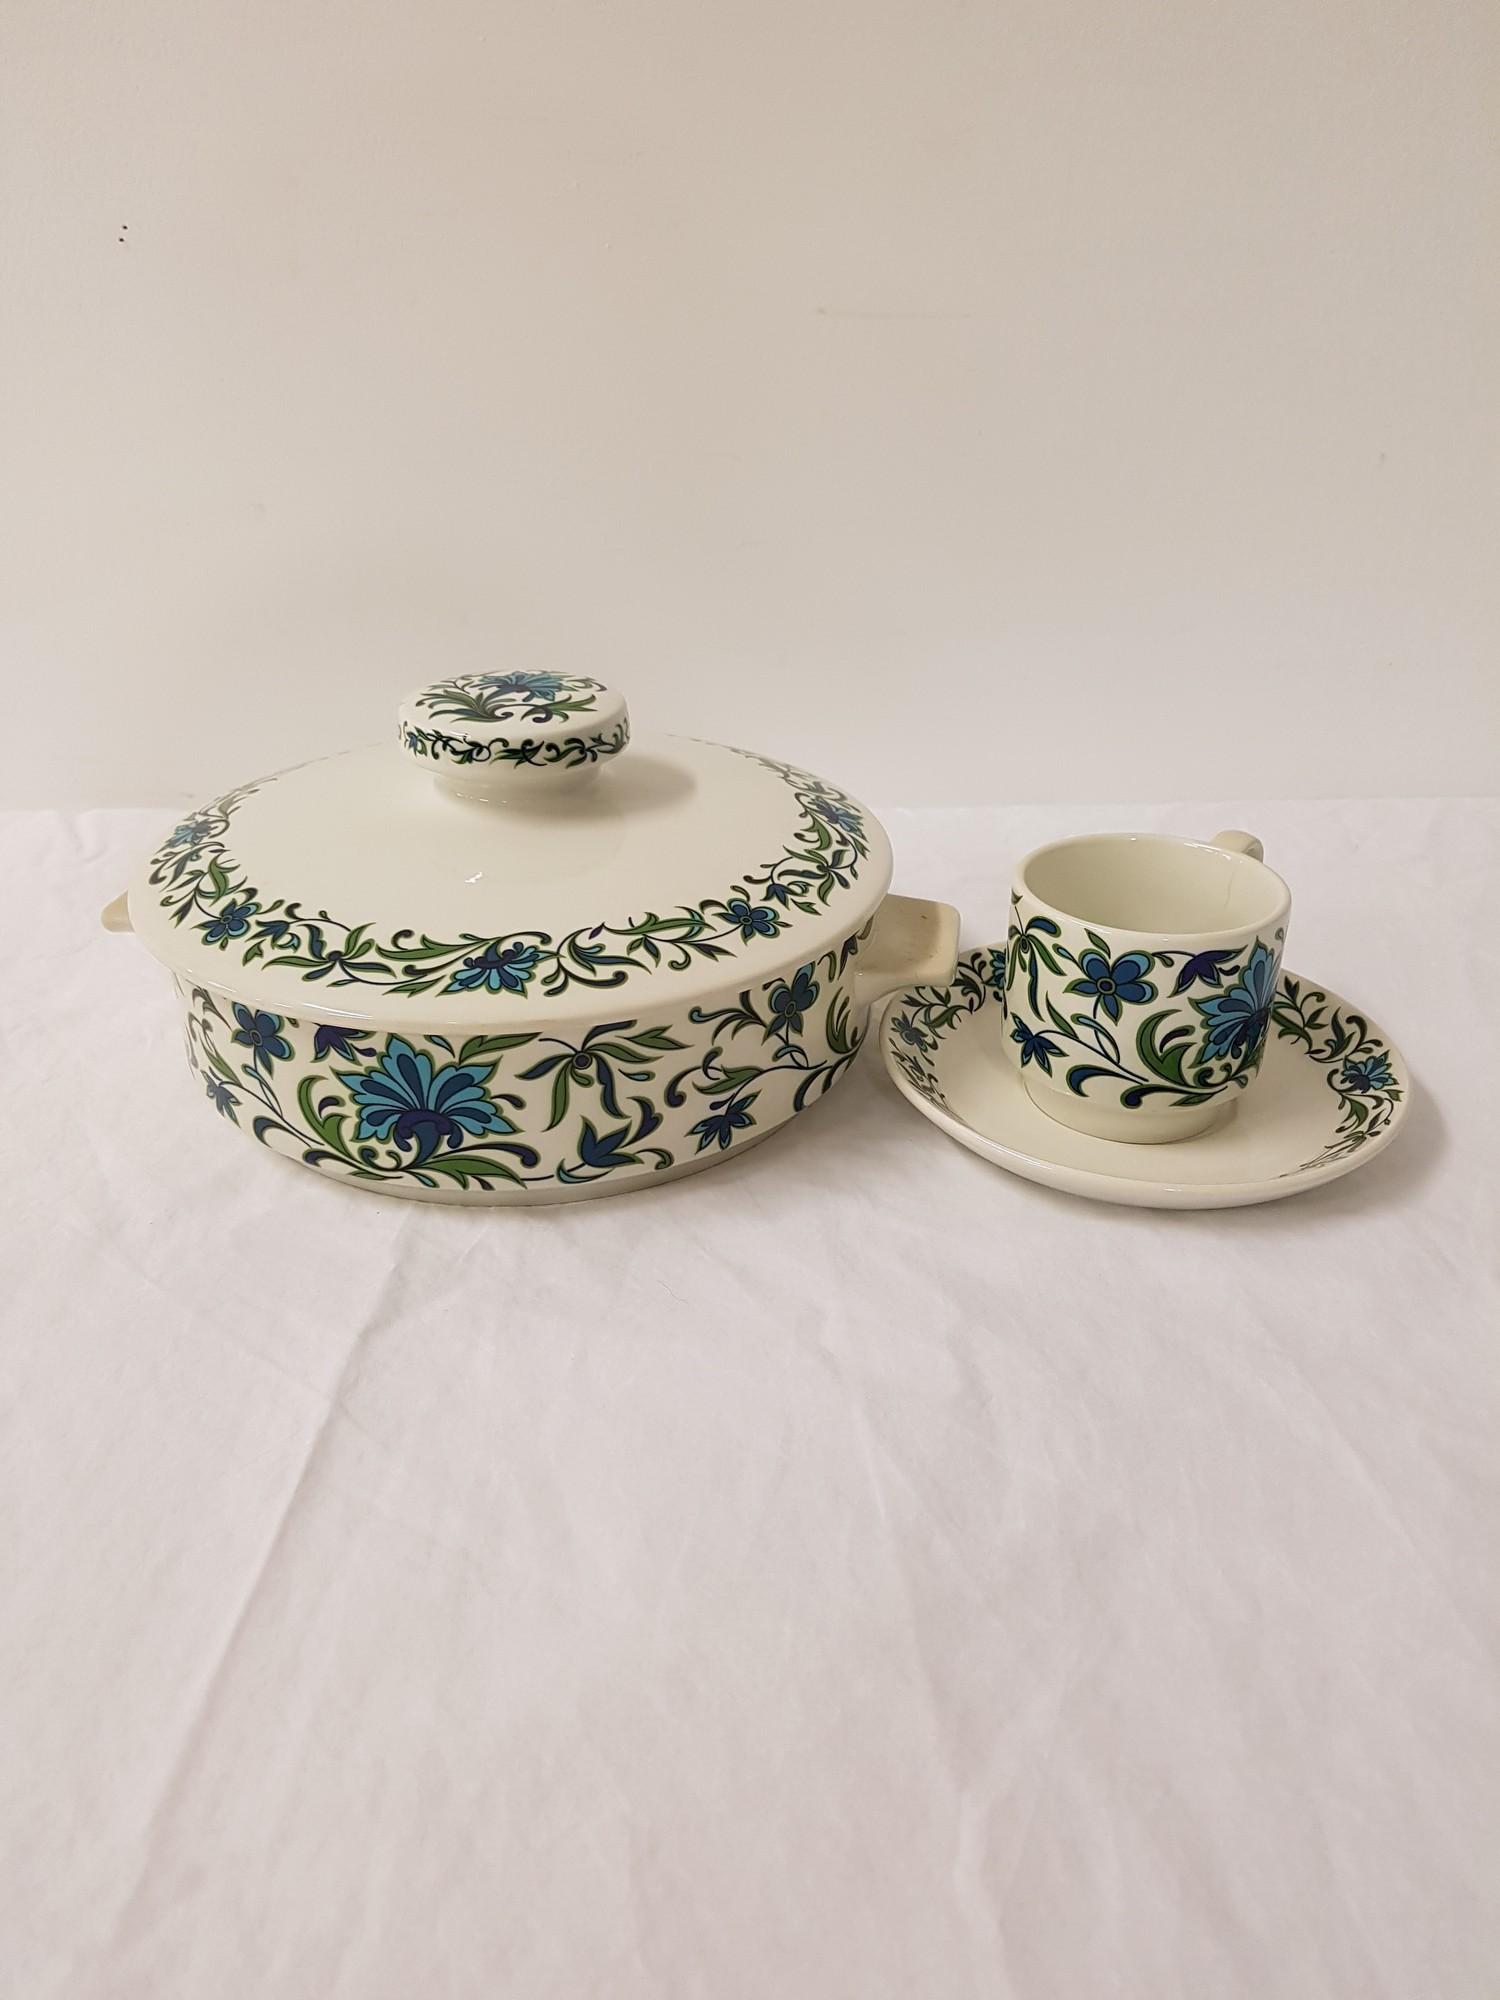 MIDWINTER POTTERY DINNER SERVICE in the Spanish Garden pattern comprising entree, dinner and side